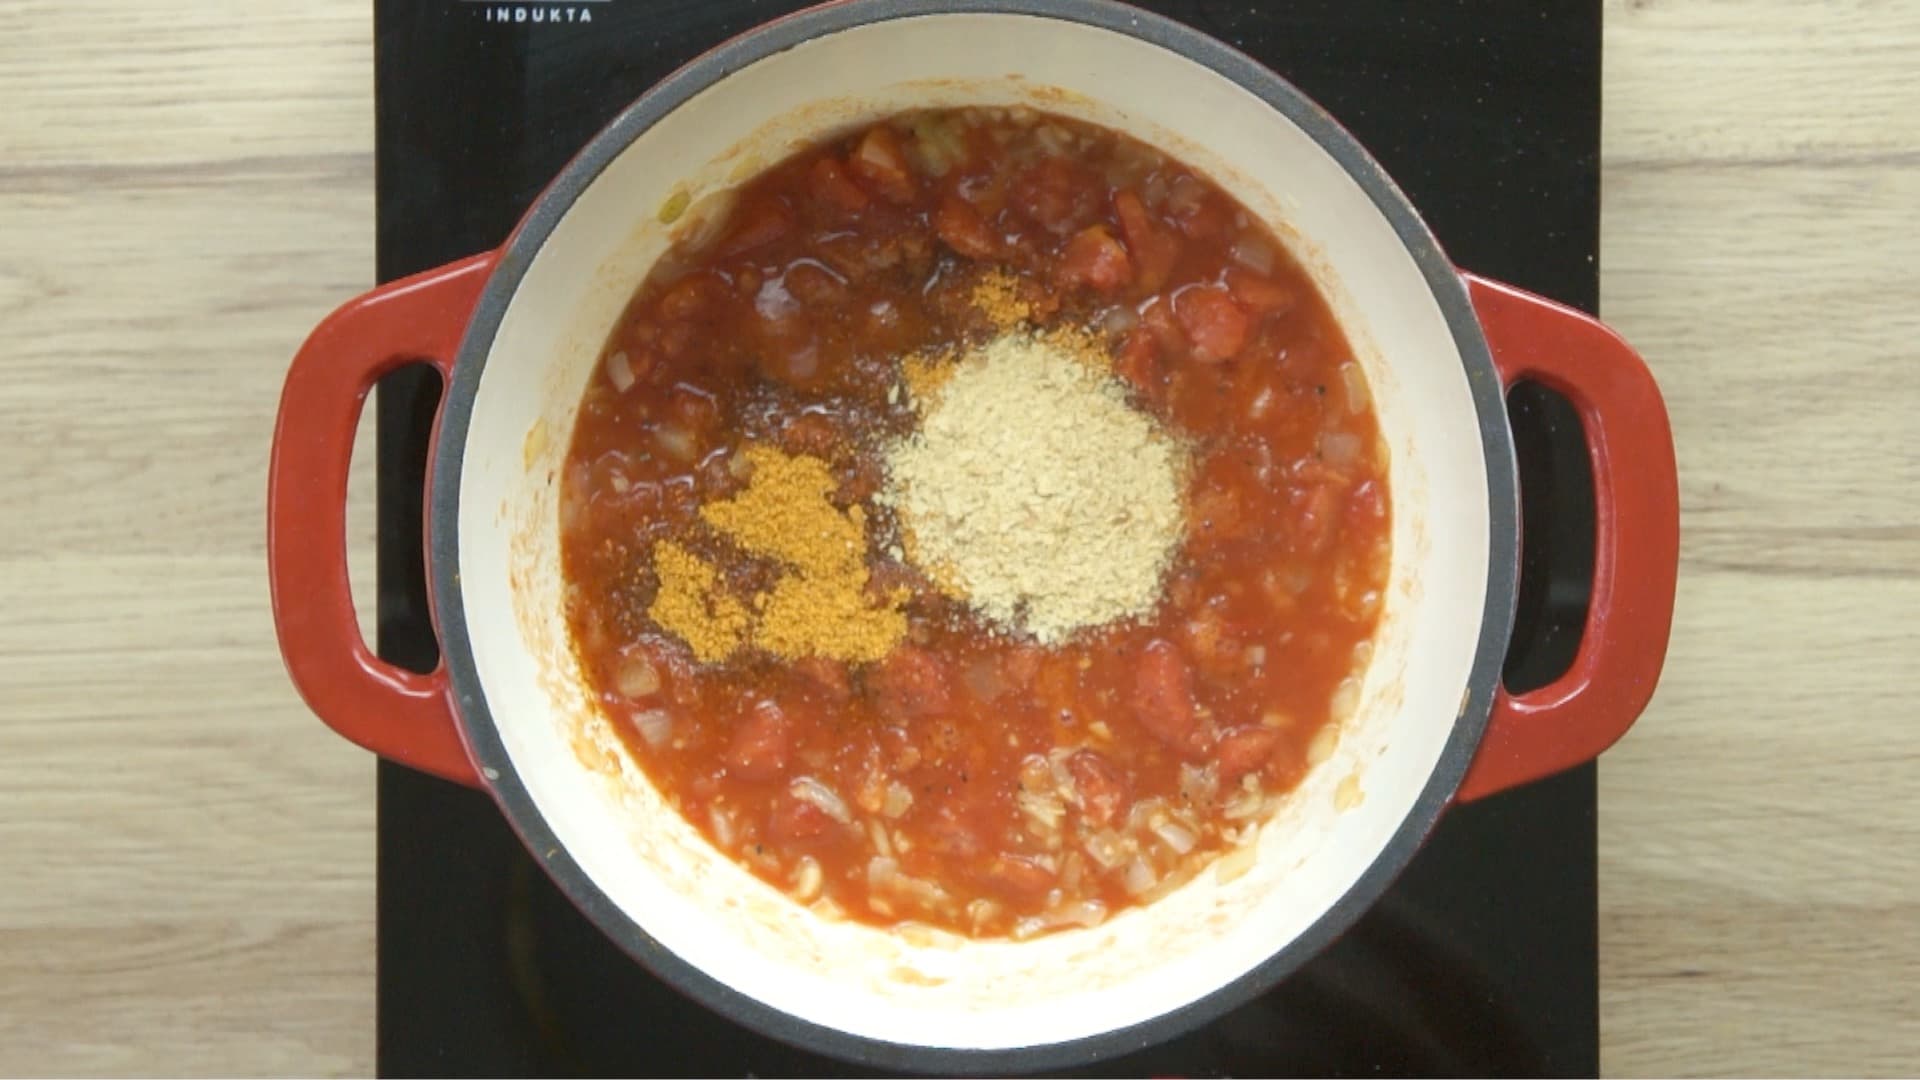 Chopped tomatoes in red sauce, onion and garlic pieces and two heaps of yellow flakes in a red enameled Dutch oven.